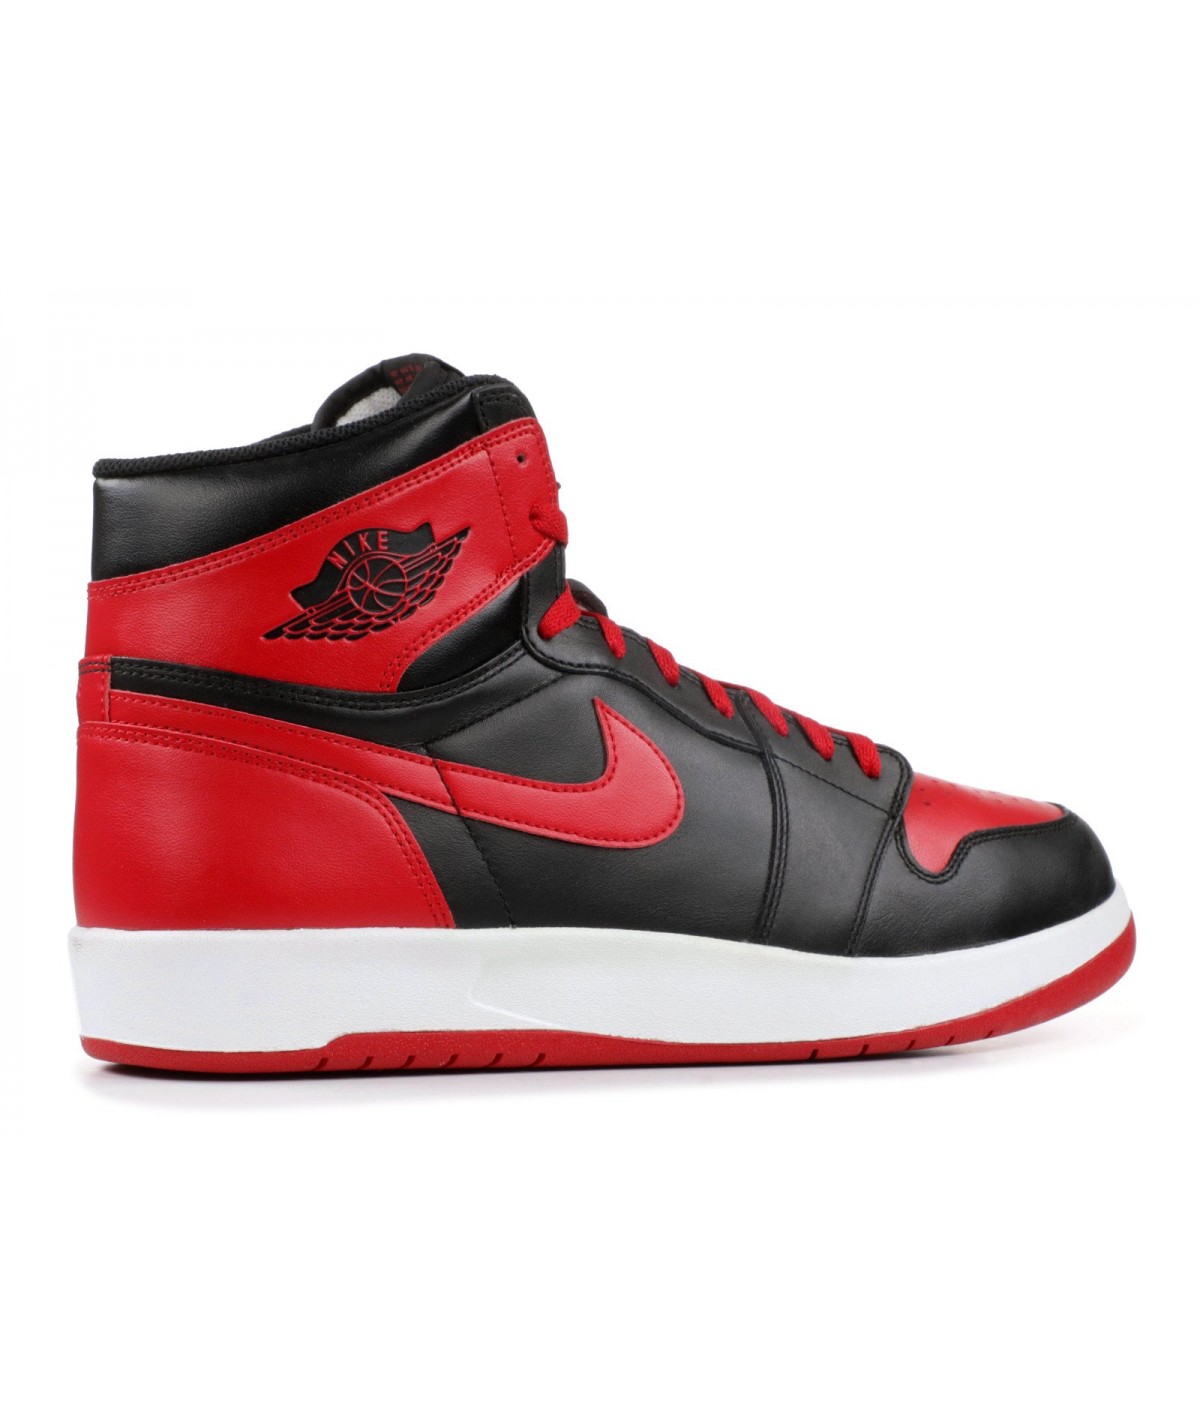 Nike Air Jordan 1 Bred I Sneakers Authentique I Edition limitée I  Expert-Sneakers